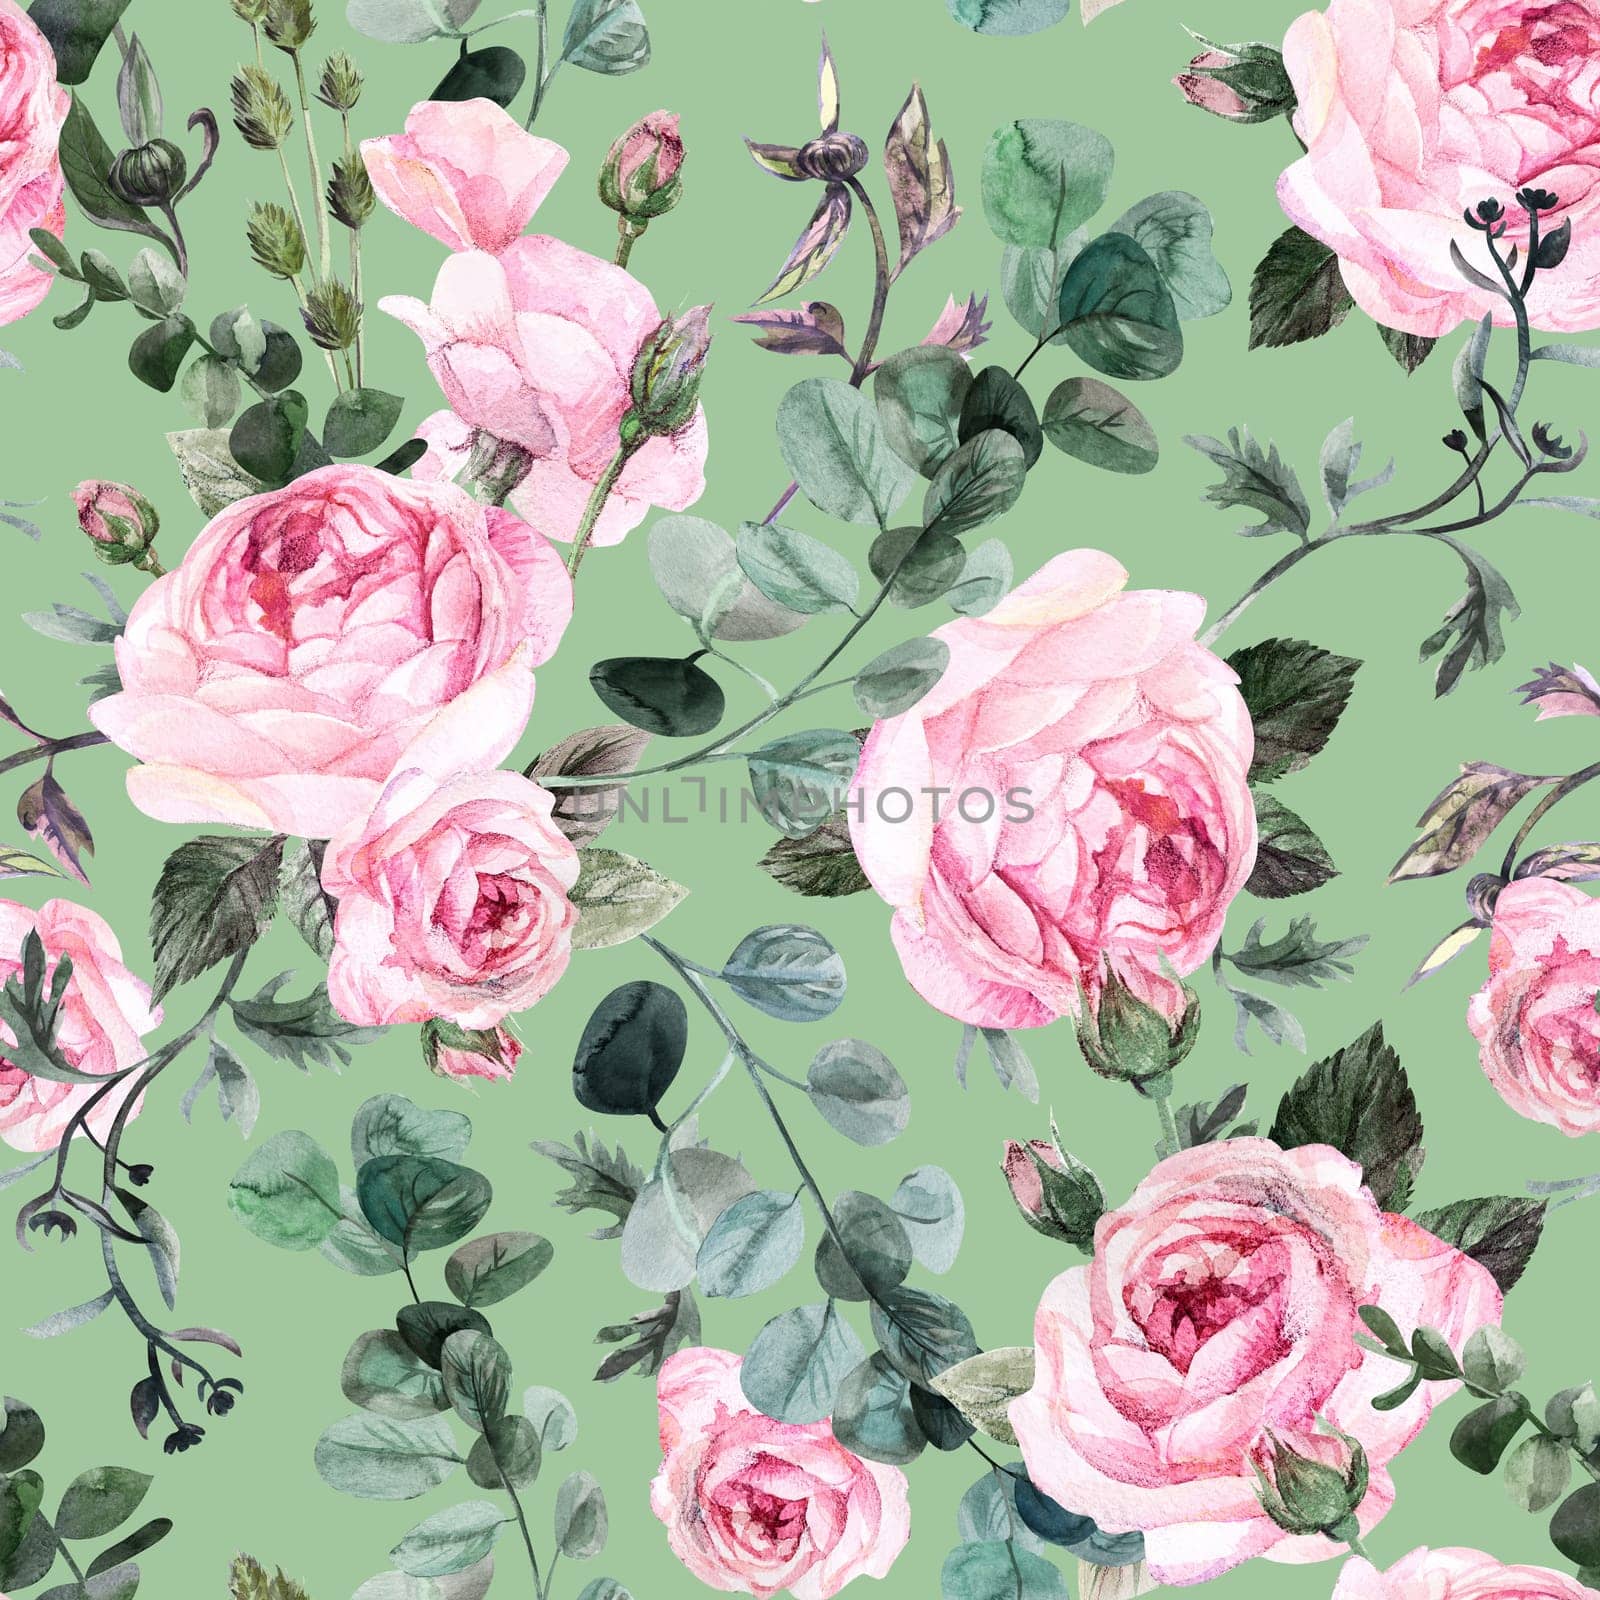 Vintage seamless pattern with delicate roses and branches on a light green background for textiles and retro designs